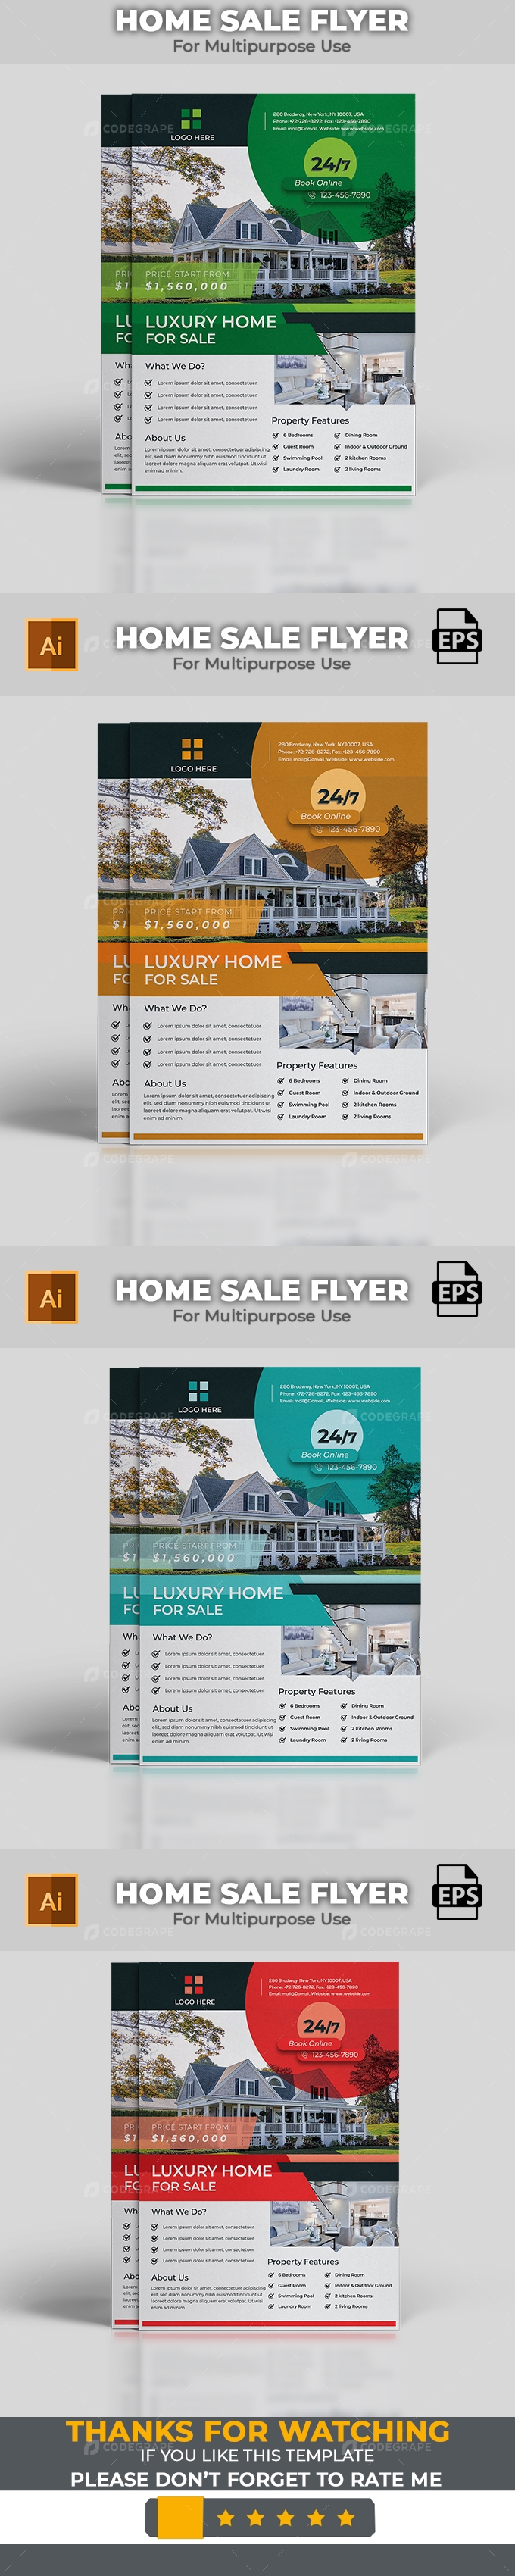 Home Sale Flyer